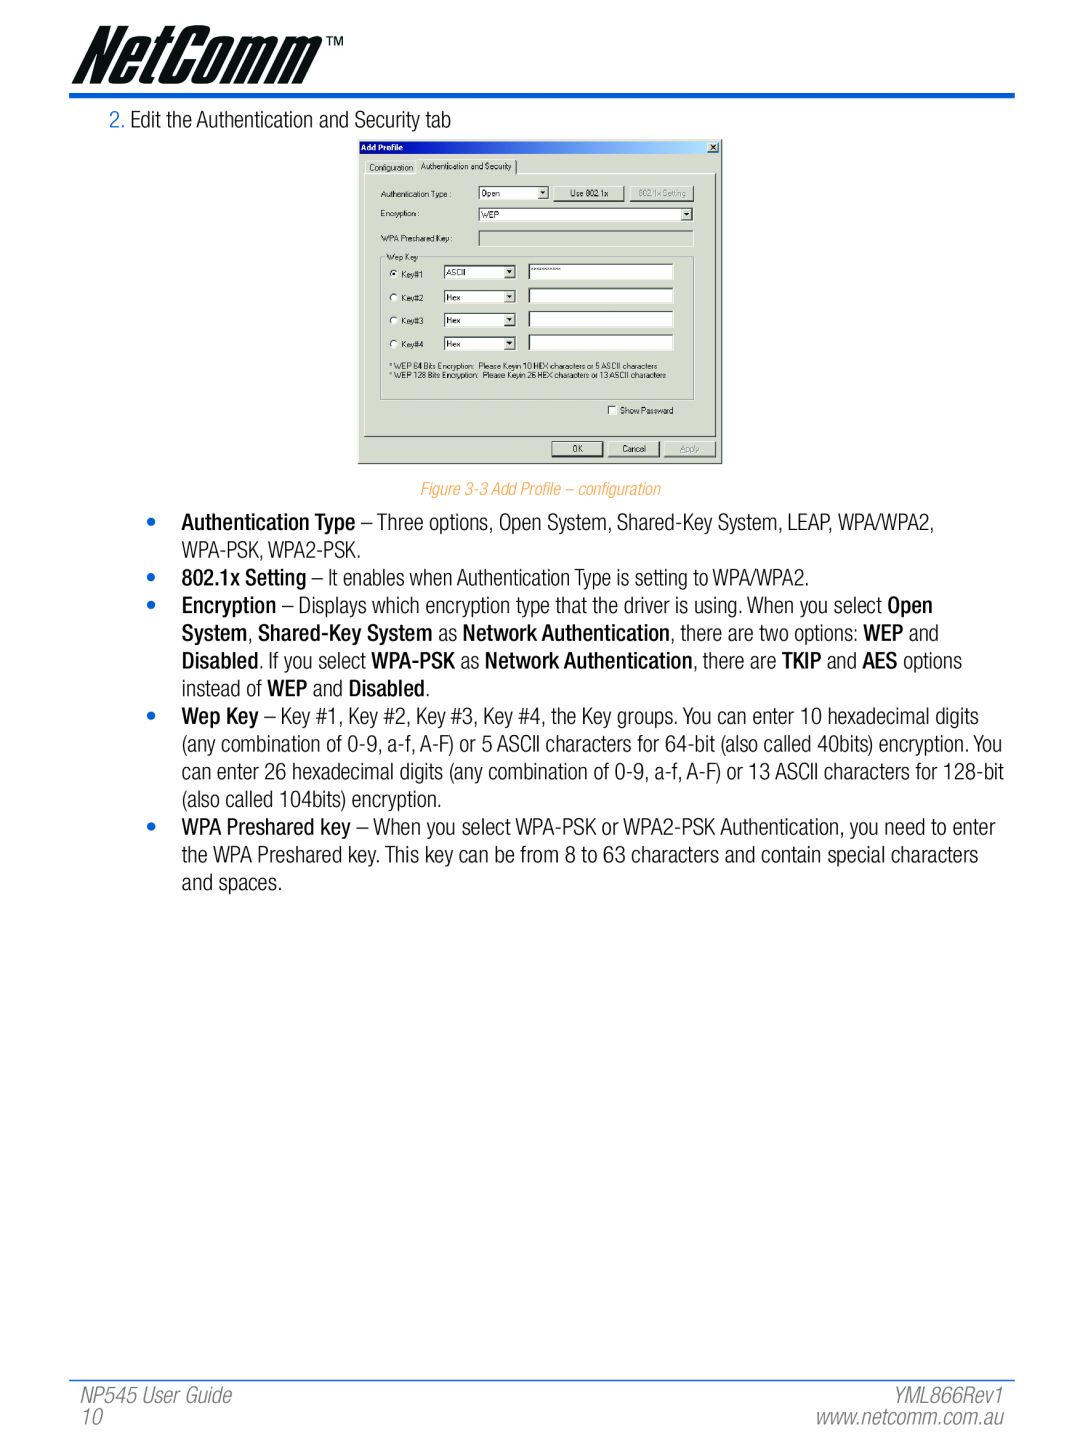 NetComm manual Edit the Authentication and Security tab, NP545 User Guide 